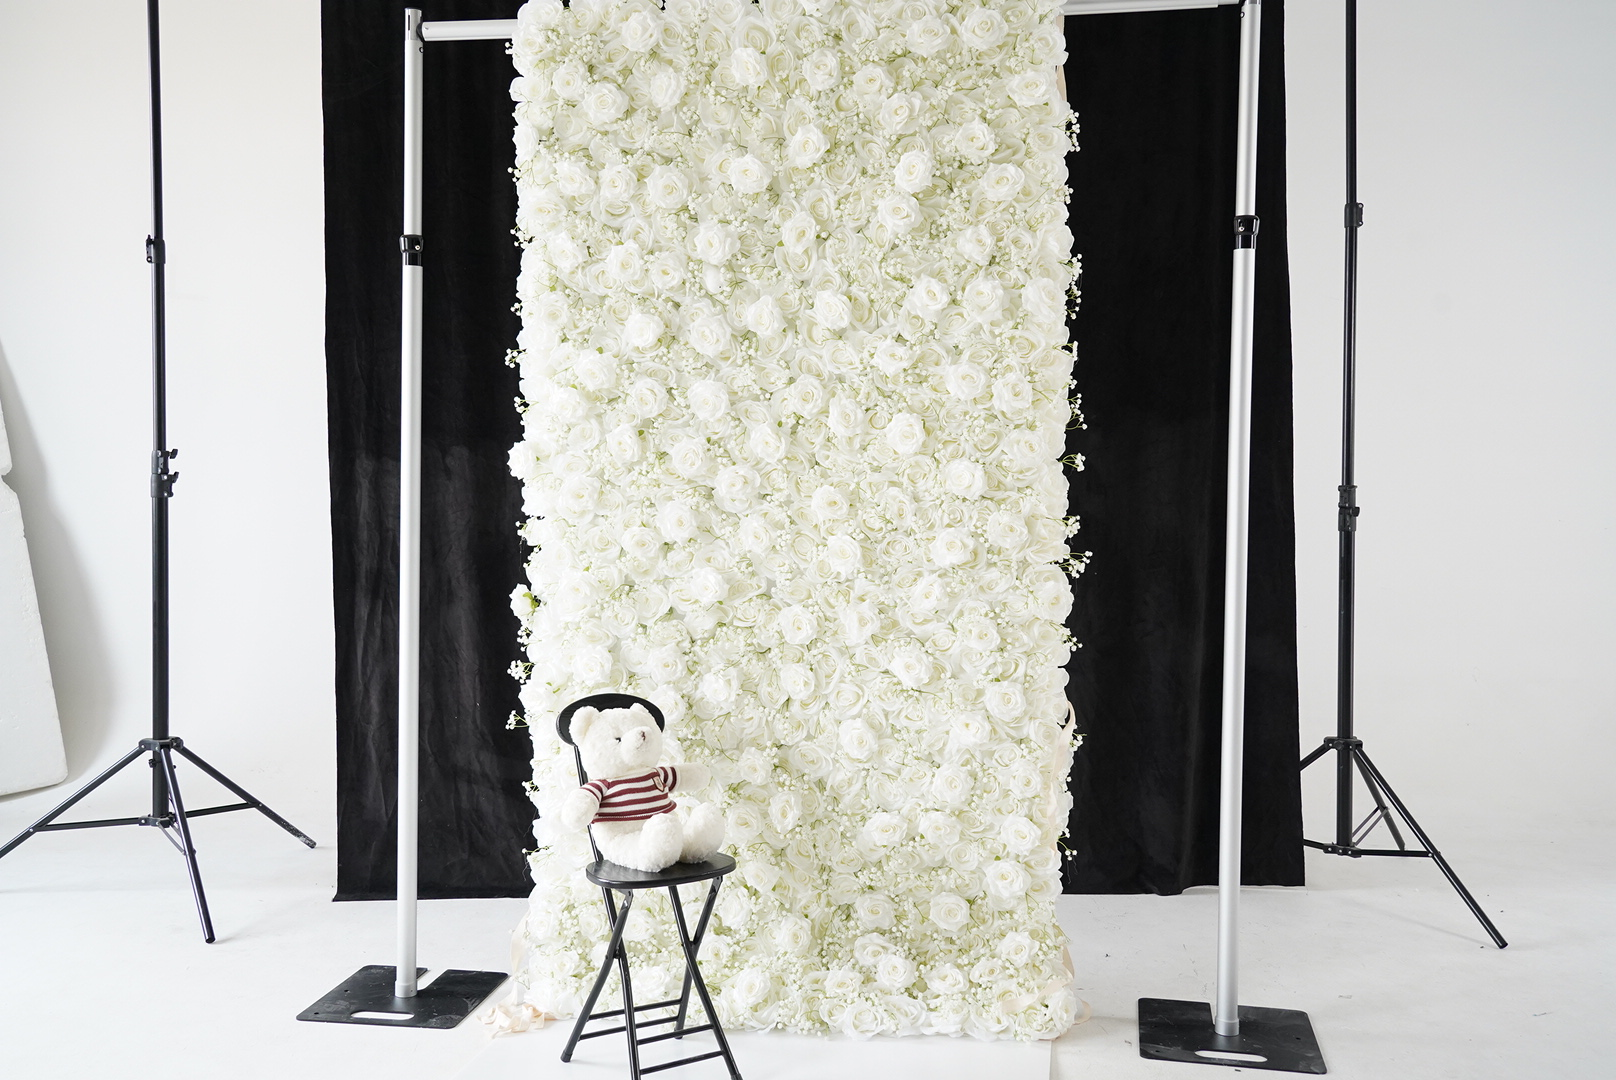 Flower Wall Baby Breath & Pure White Rose Fabric Rolling Up Curtain Floral Backdrop Wedding Party Proposal Decor